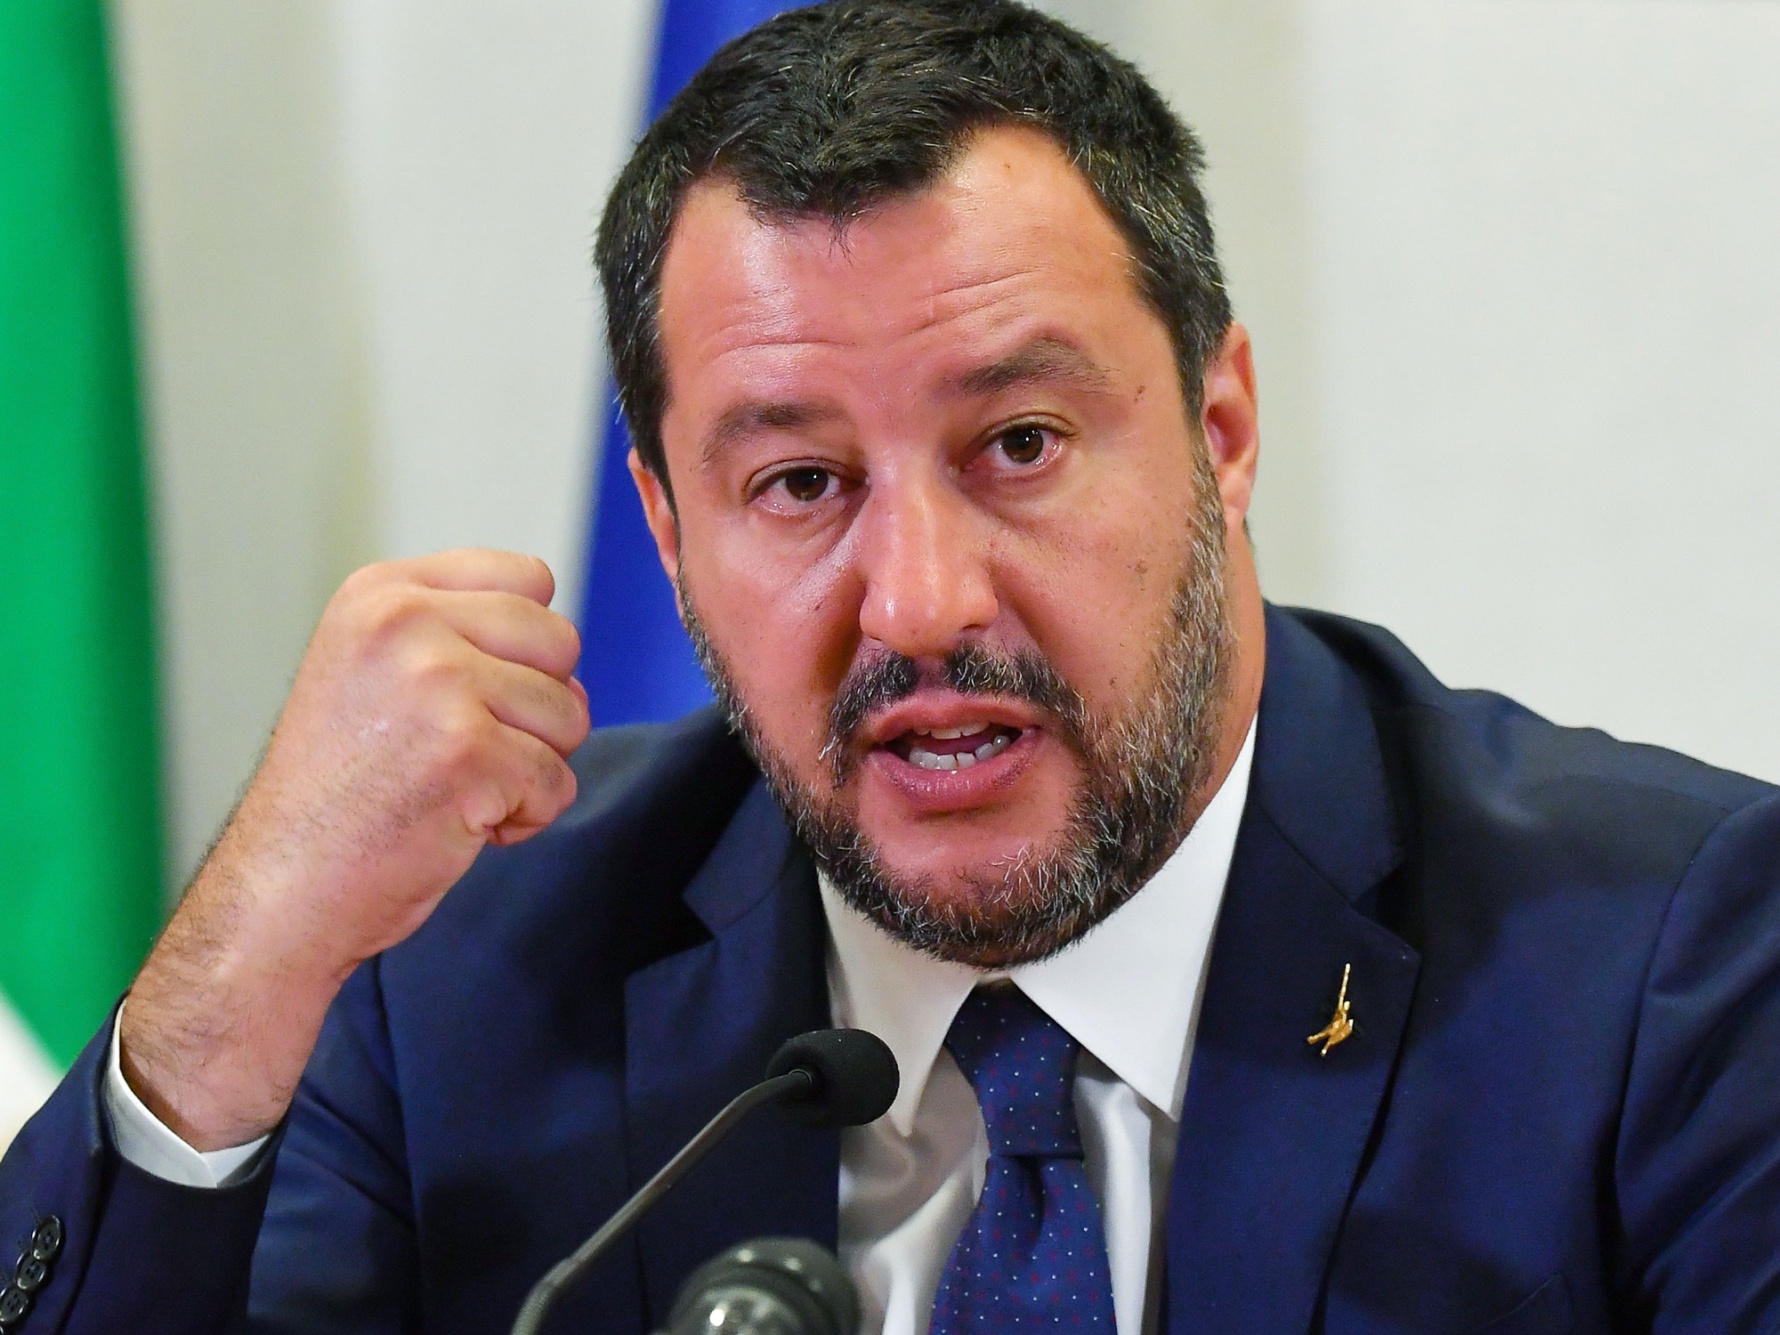 Salvini Takes On France, Germany as Coalition Hangs in Balance - Bloomberg